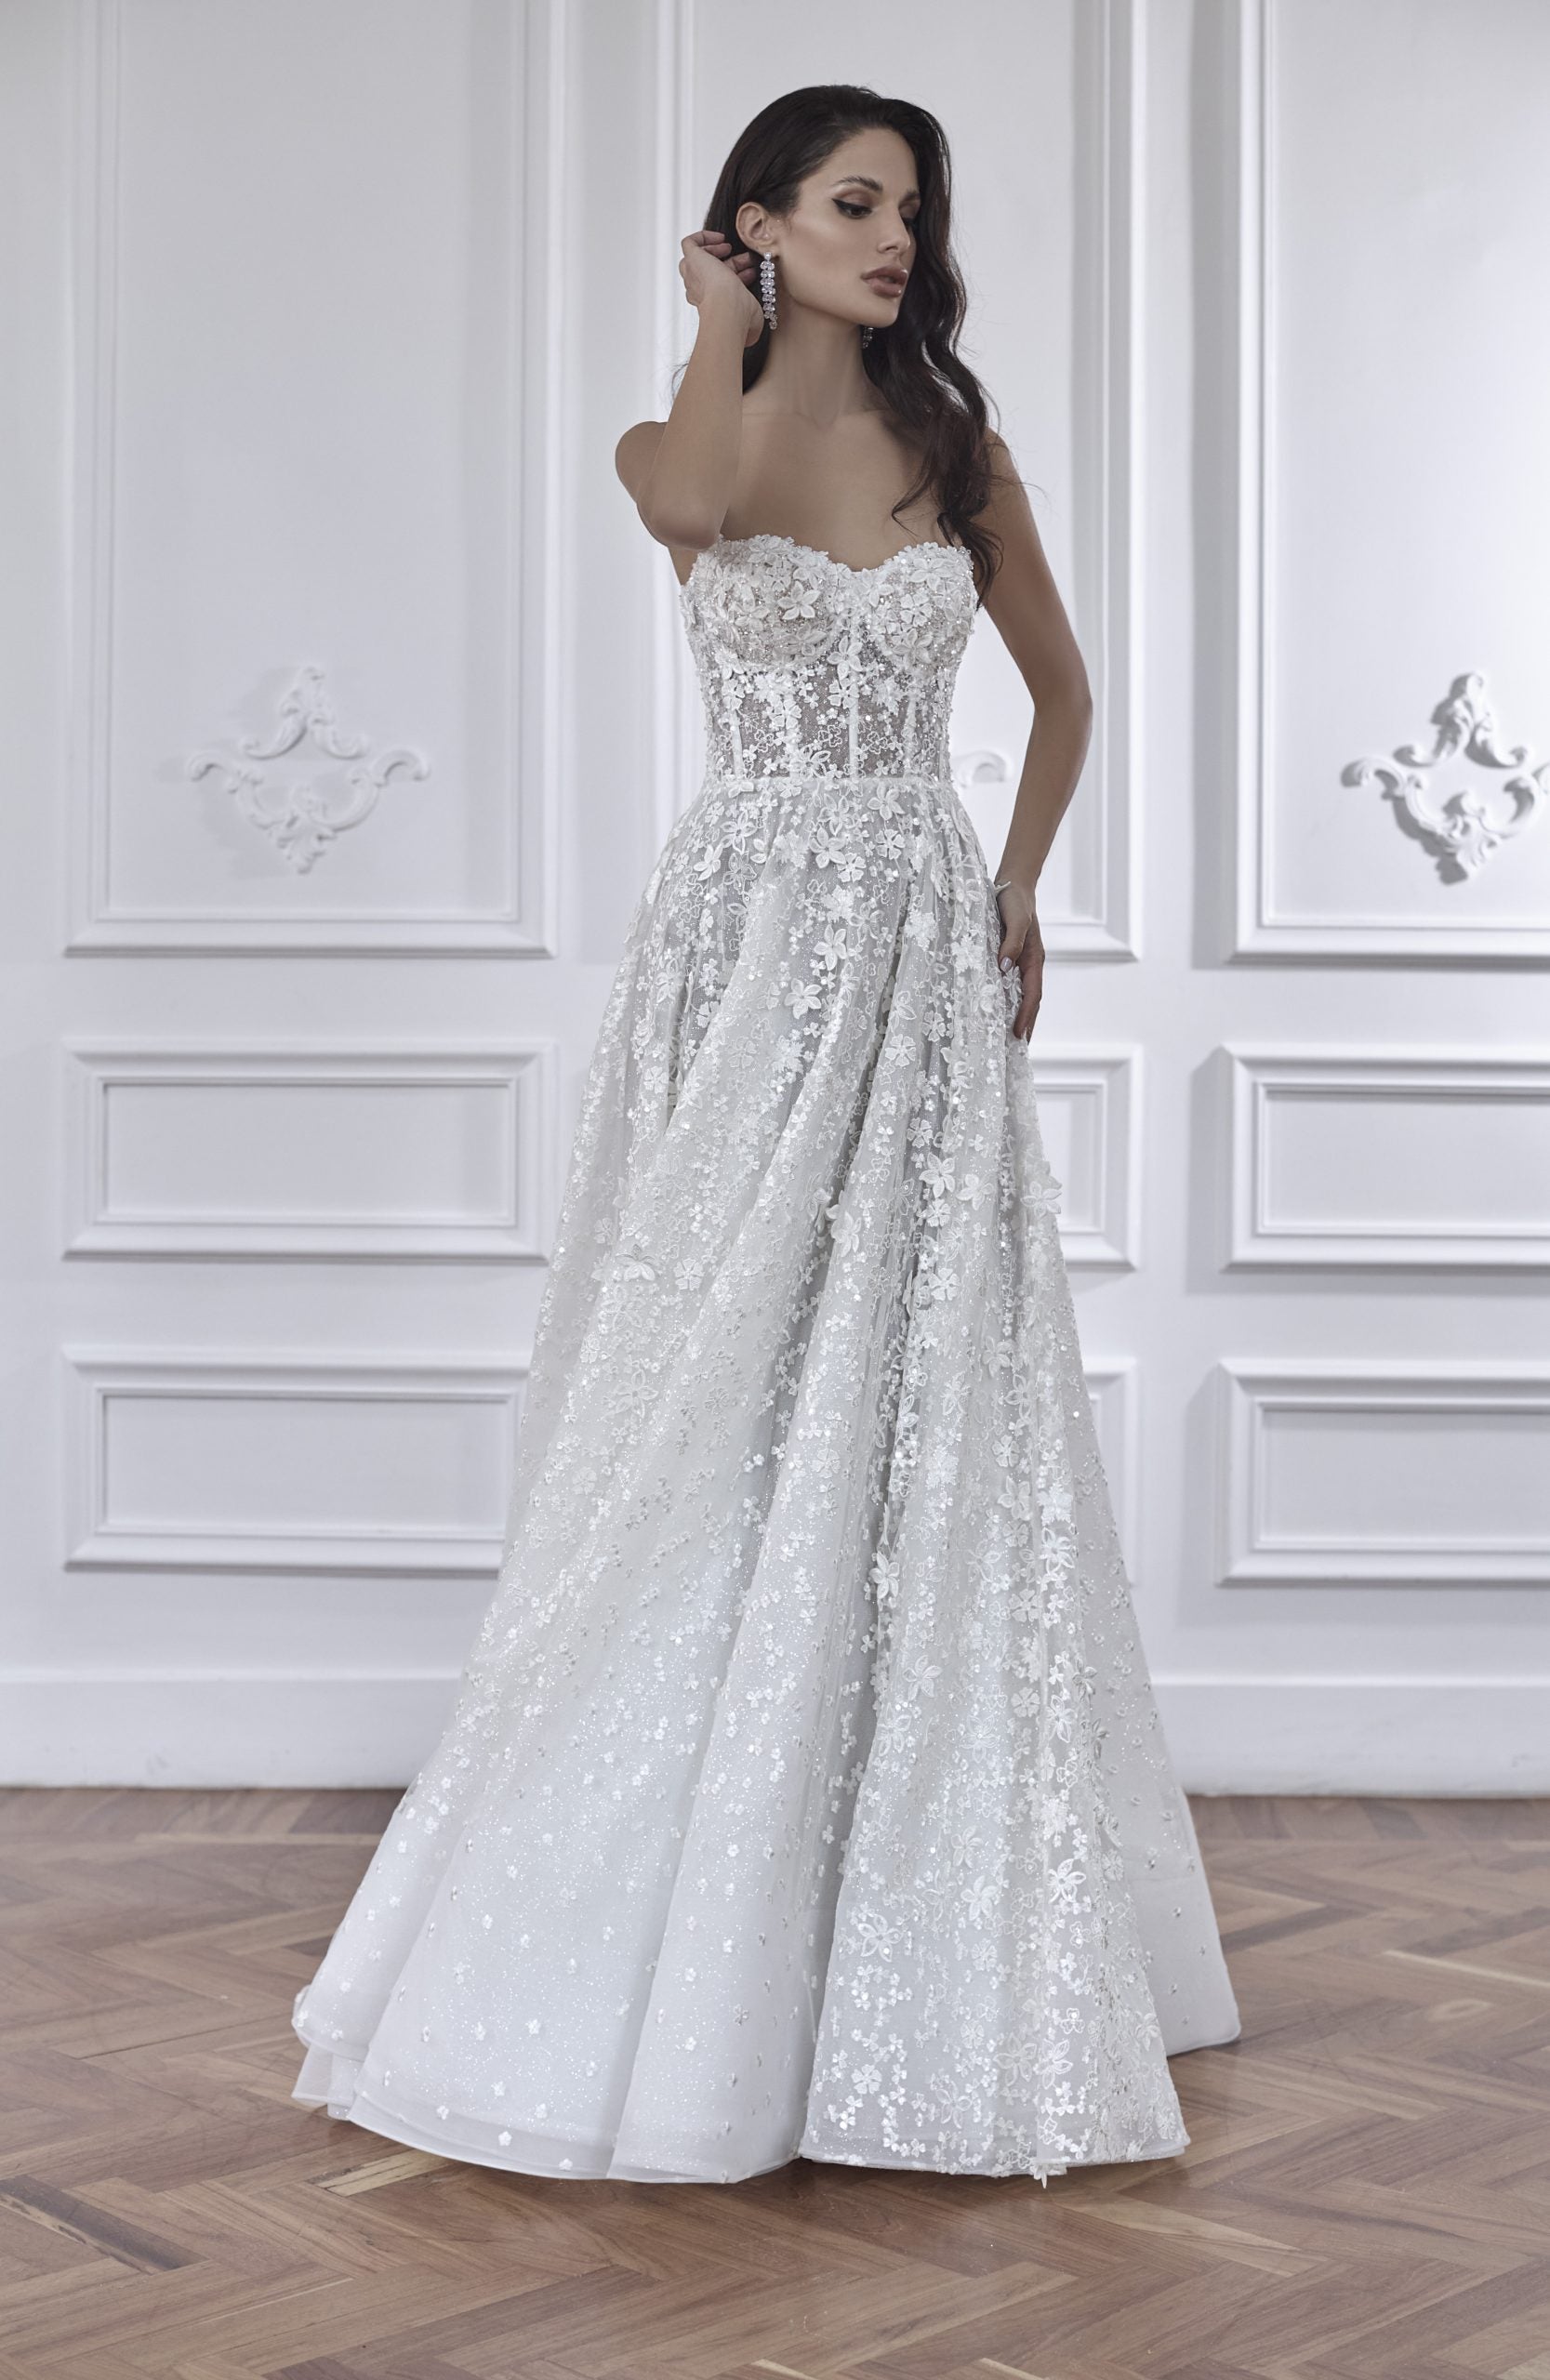 Strapless A-line Wedding Dress With 3D Floral Embroidery by Maison Signore